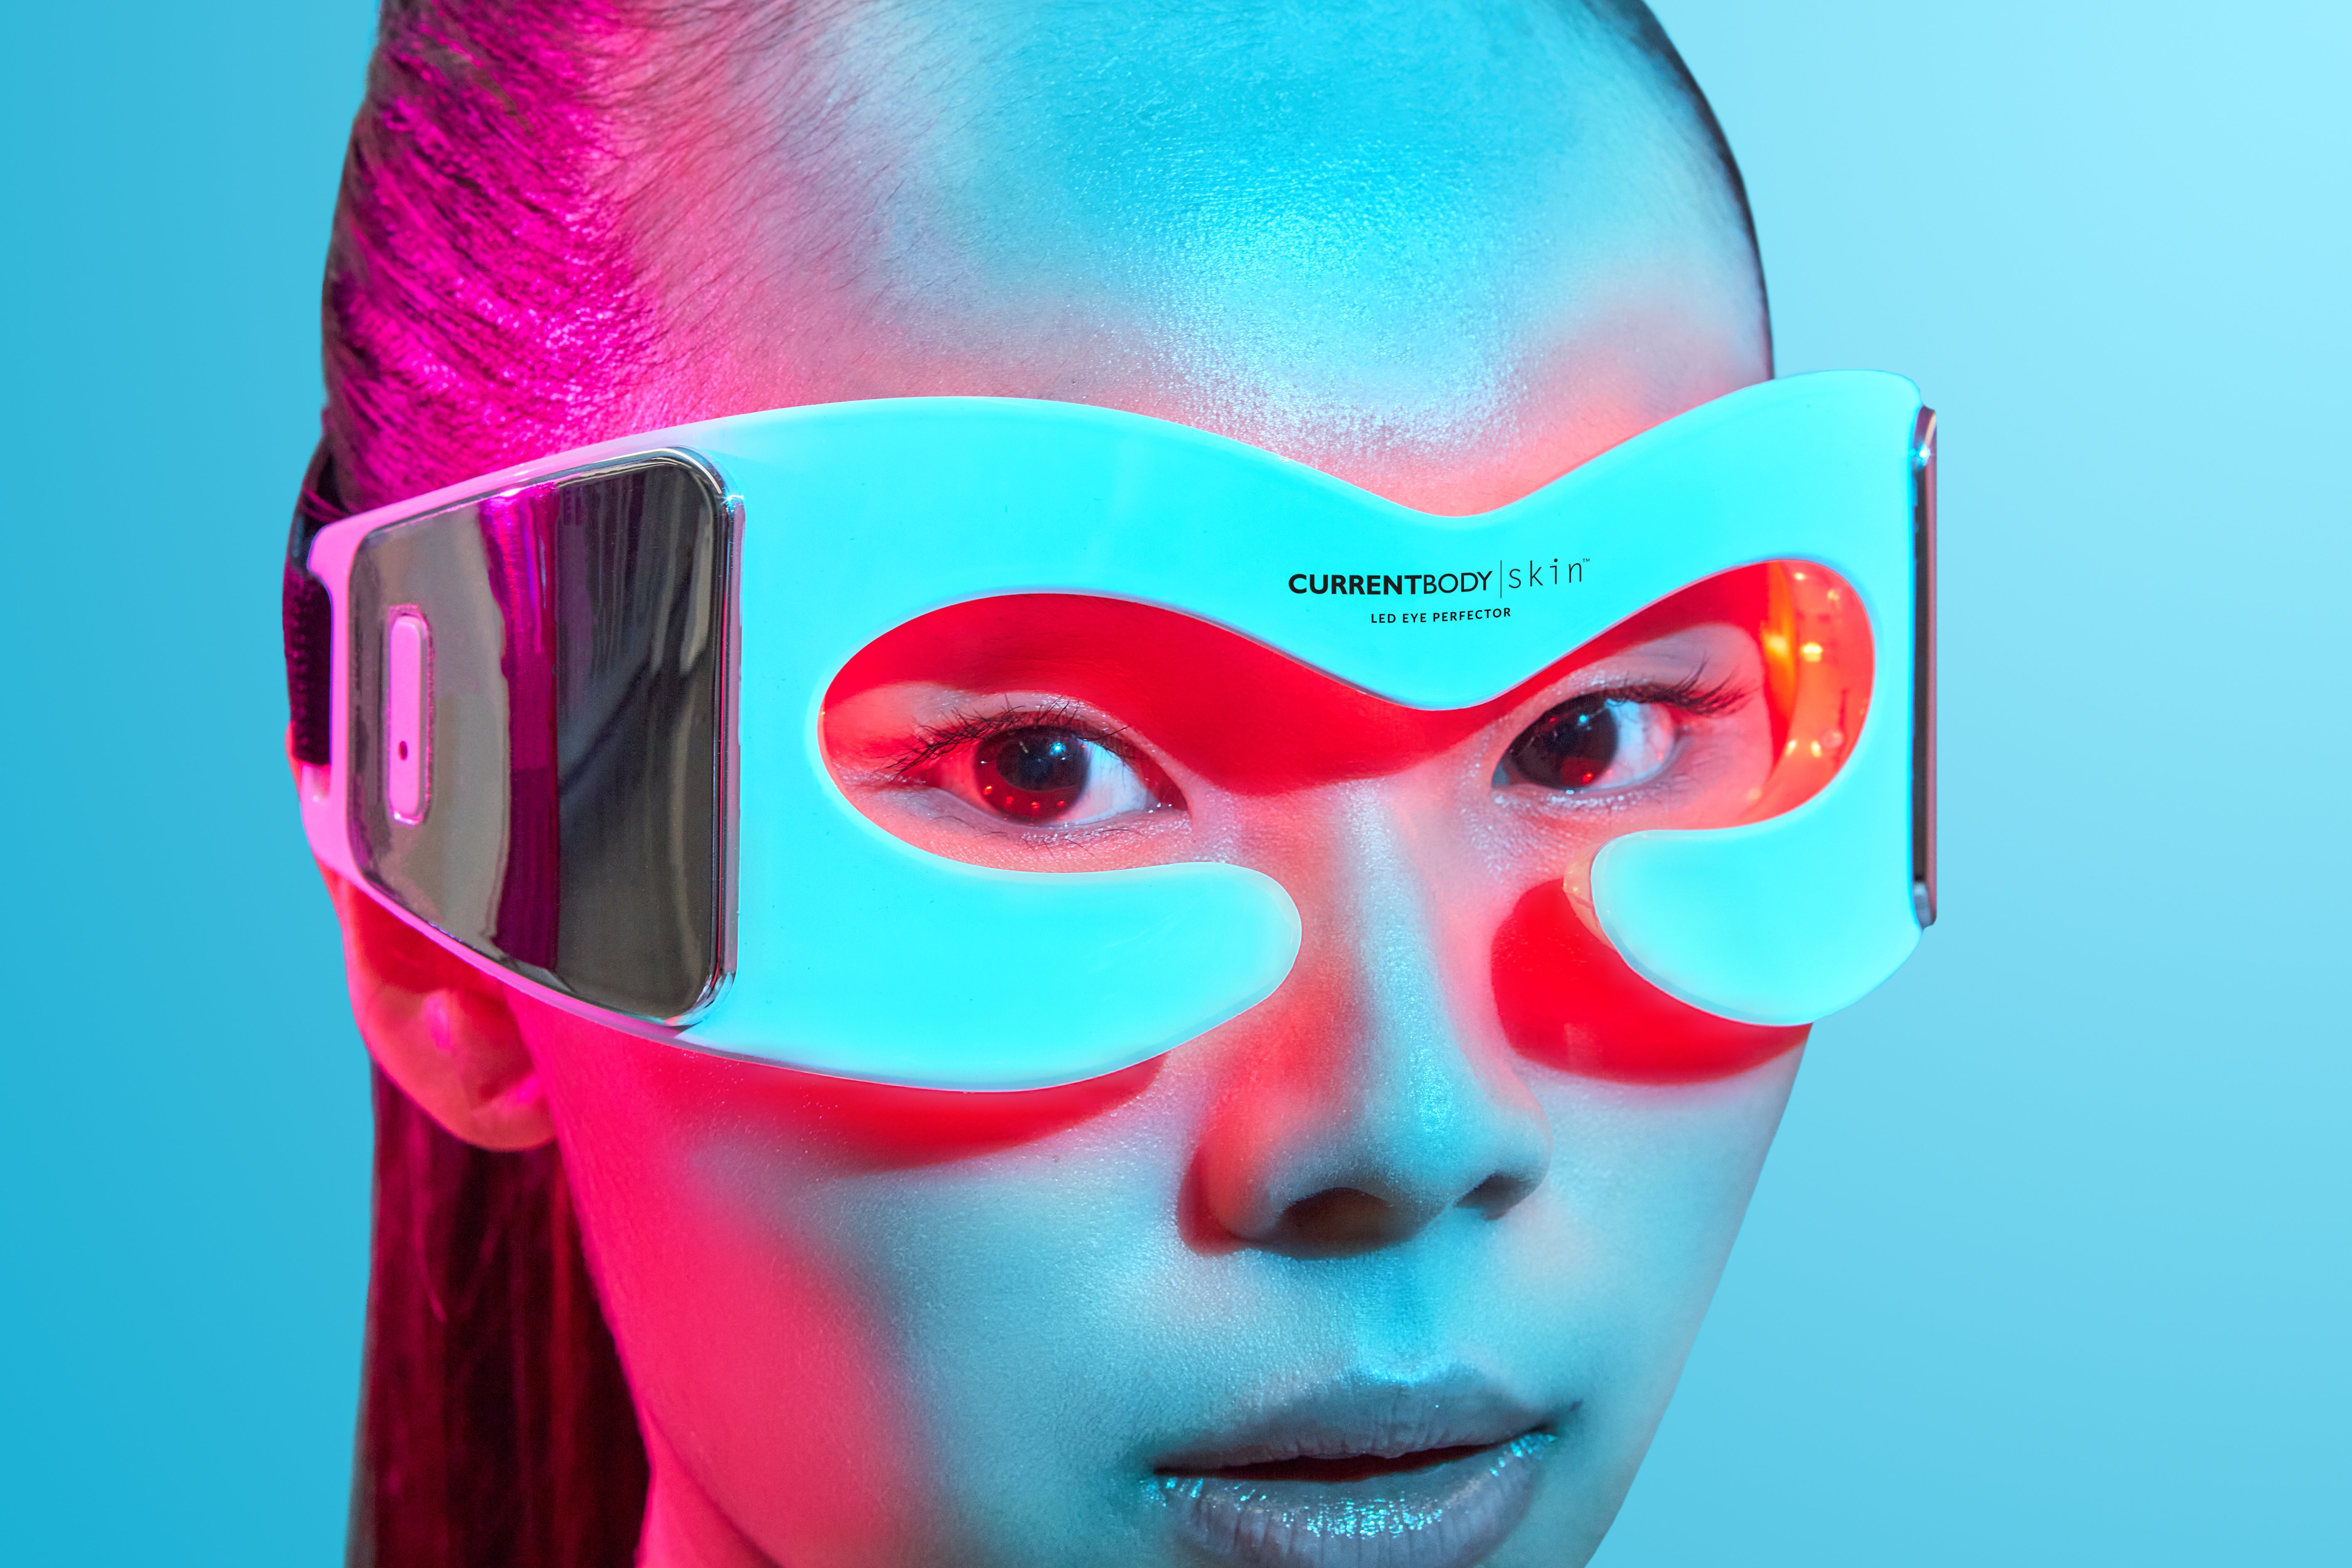 iets Cataract stof in de ogen gooien Rejuvenation awaits with CurrentBody's new LED mask for your eyes only |  The Independent